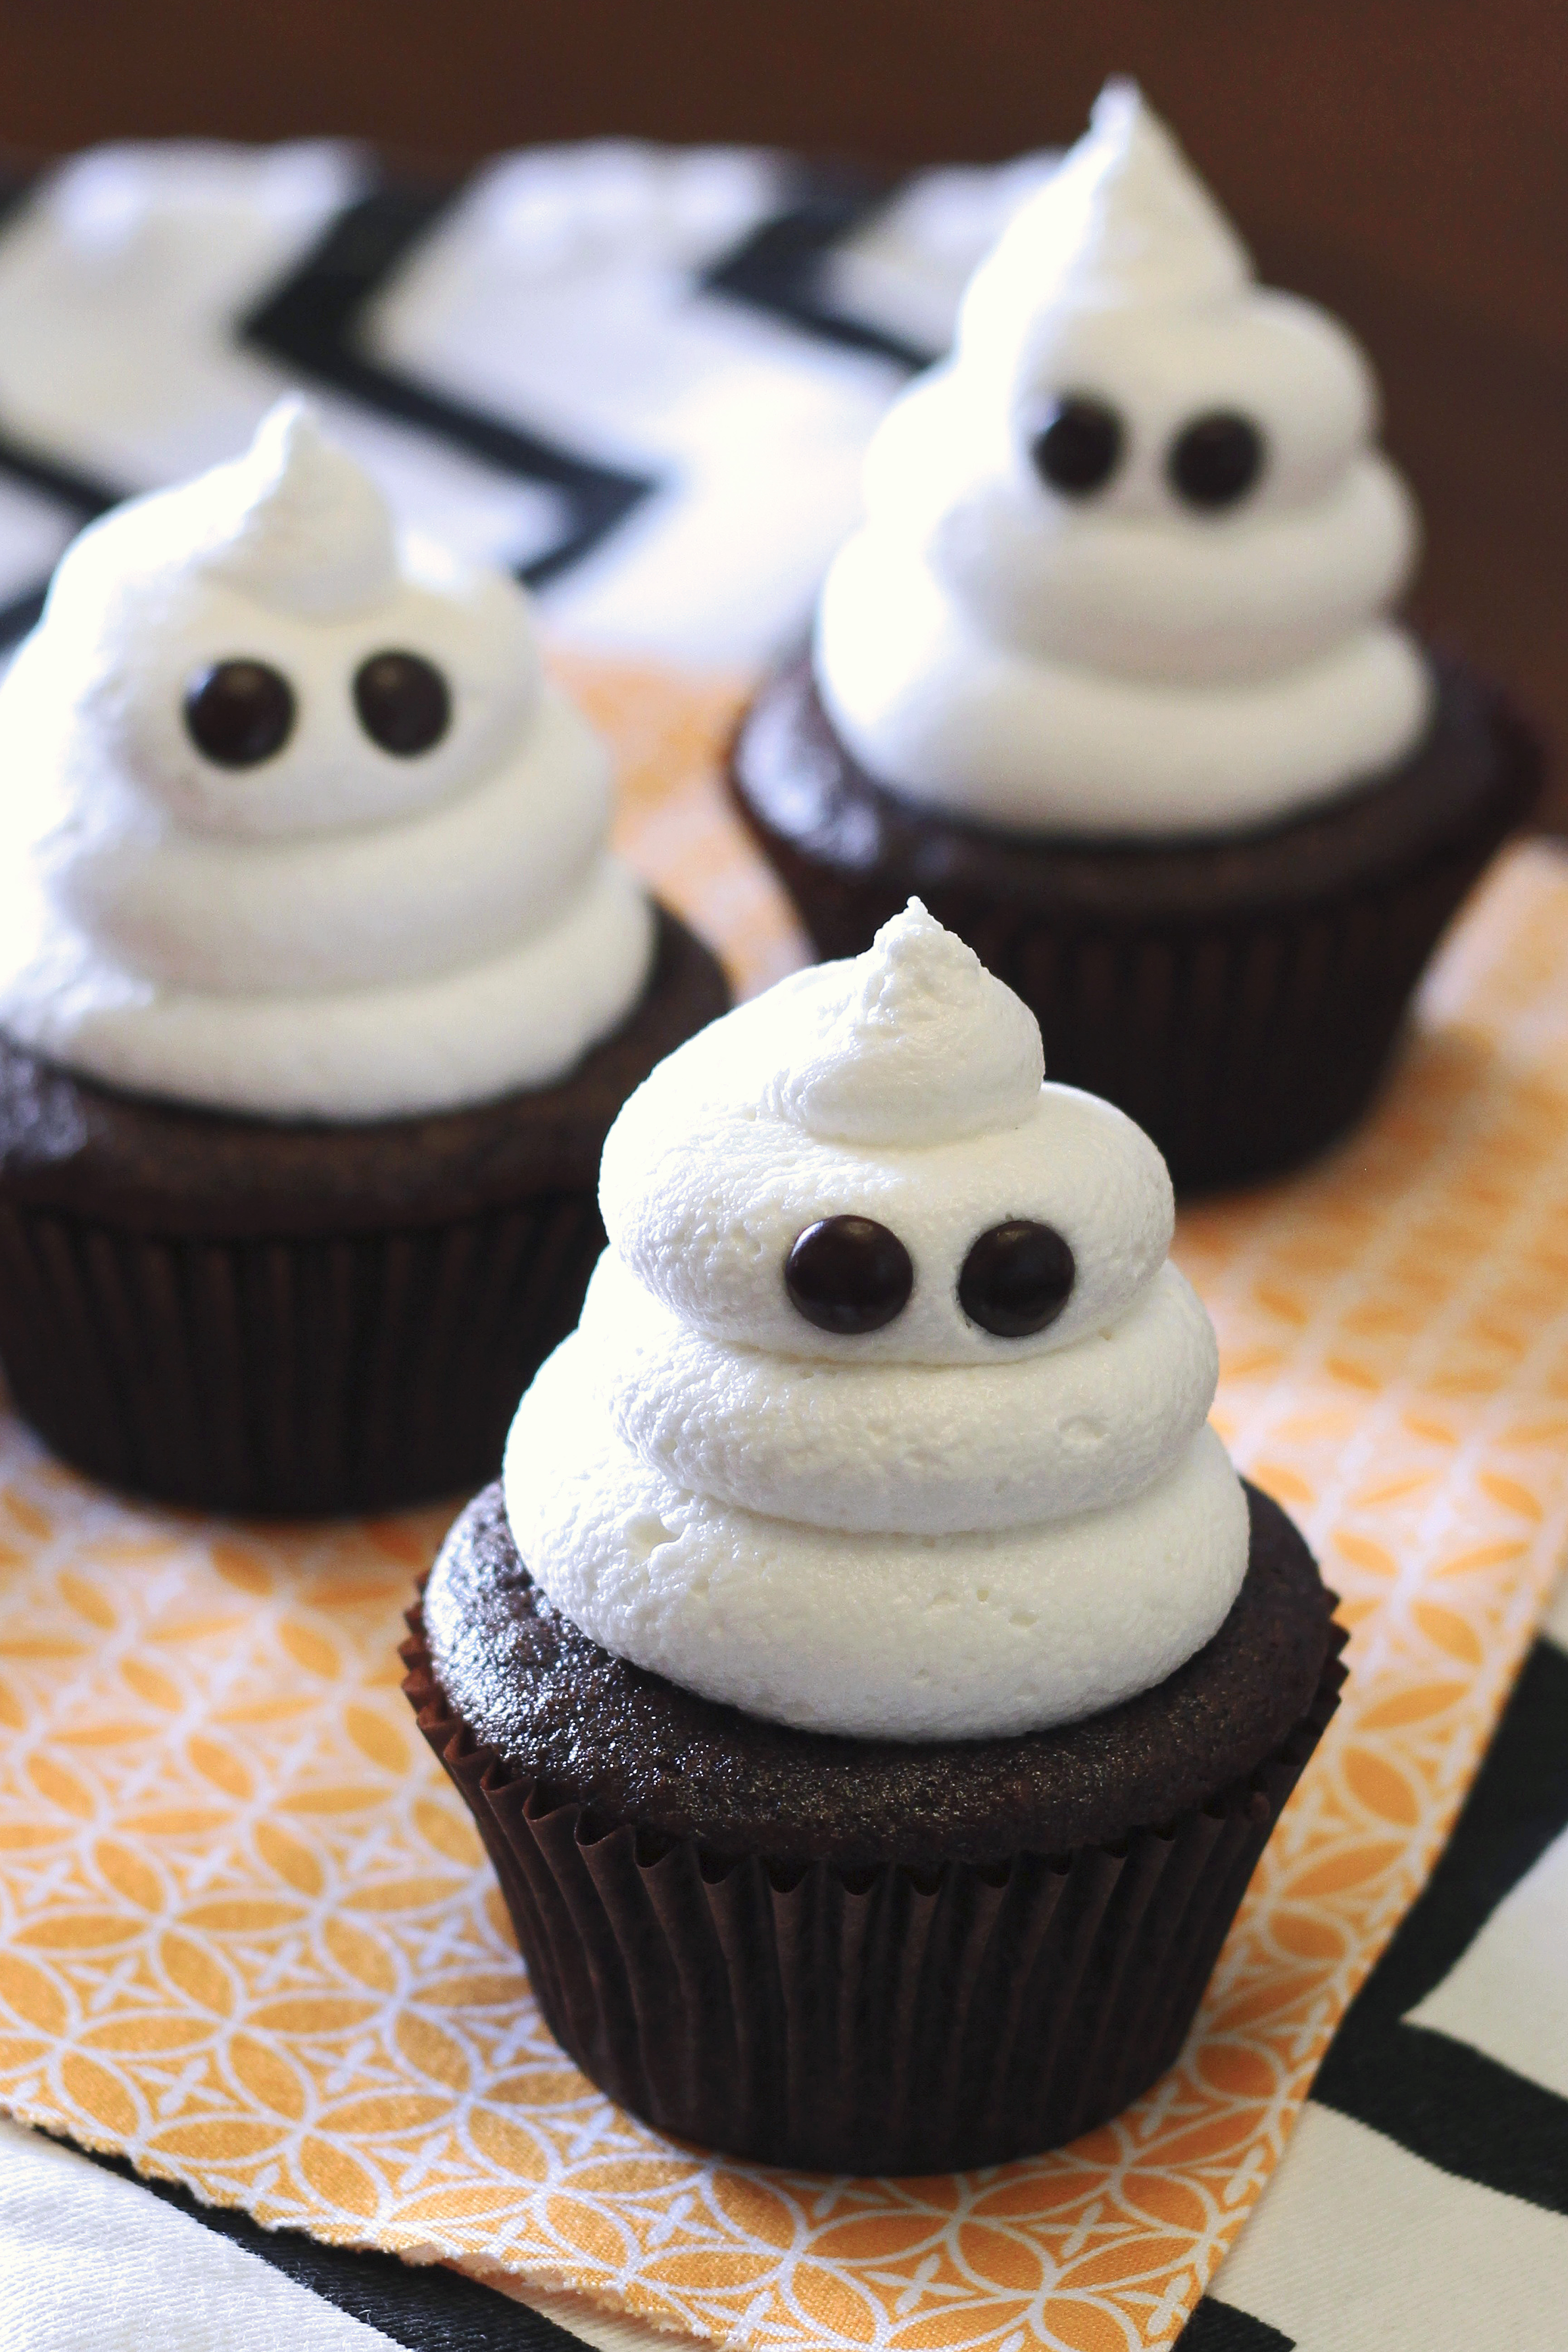 Gluten Free Vegan Ghost Cupcakes. Just about the cutest, spookiest cupcakes you ever did see!